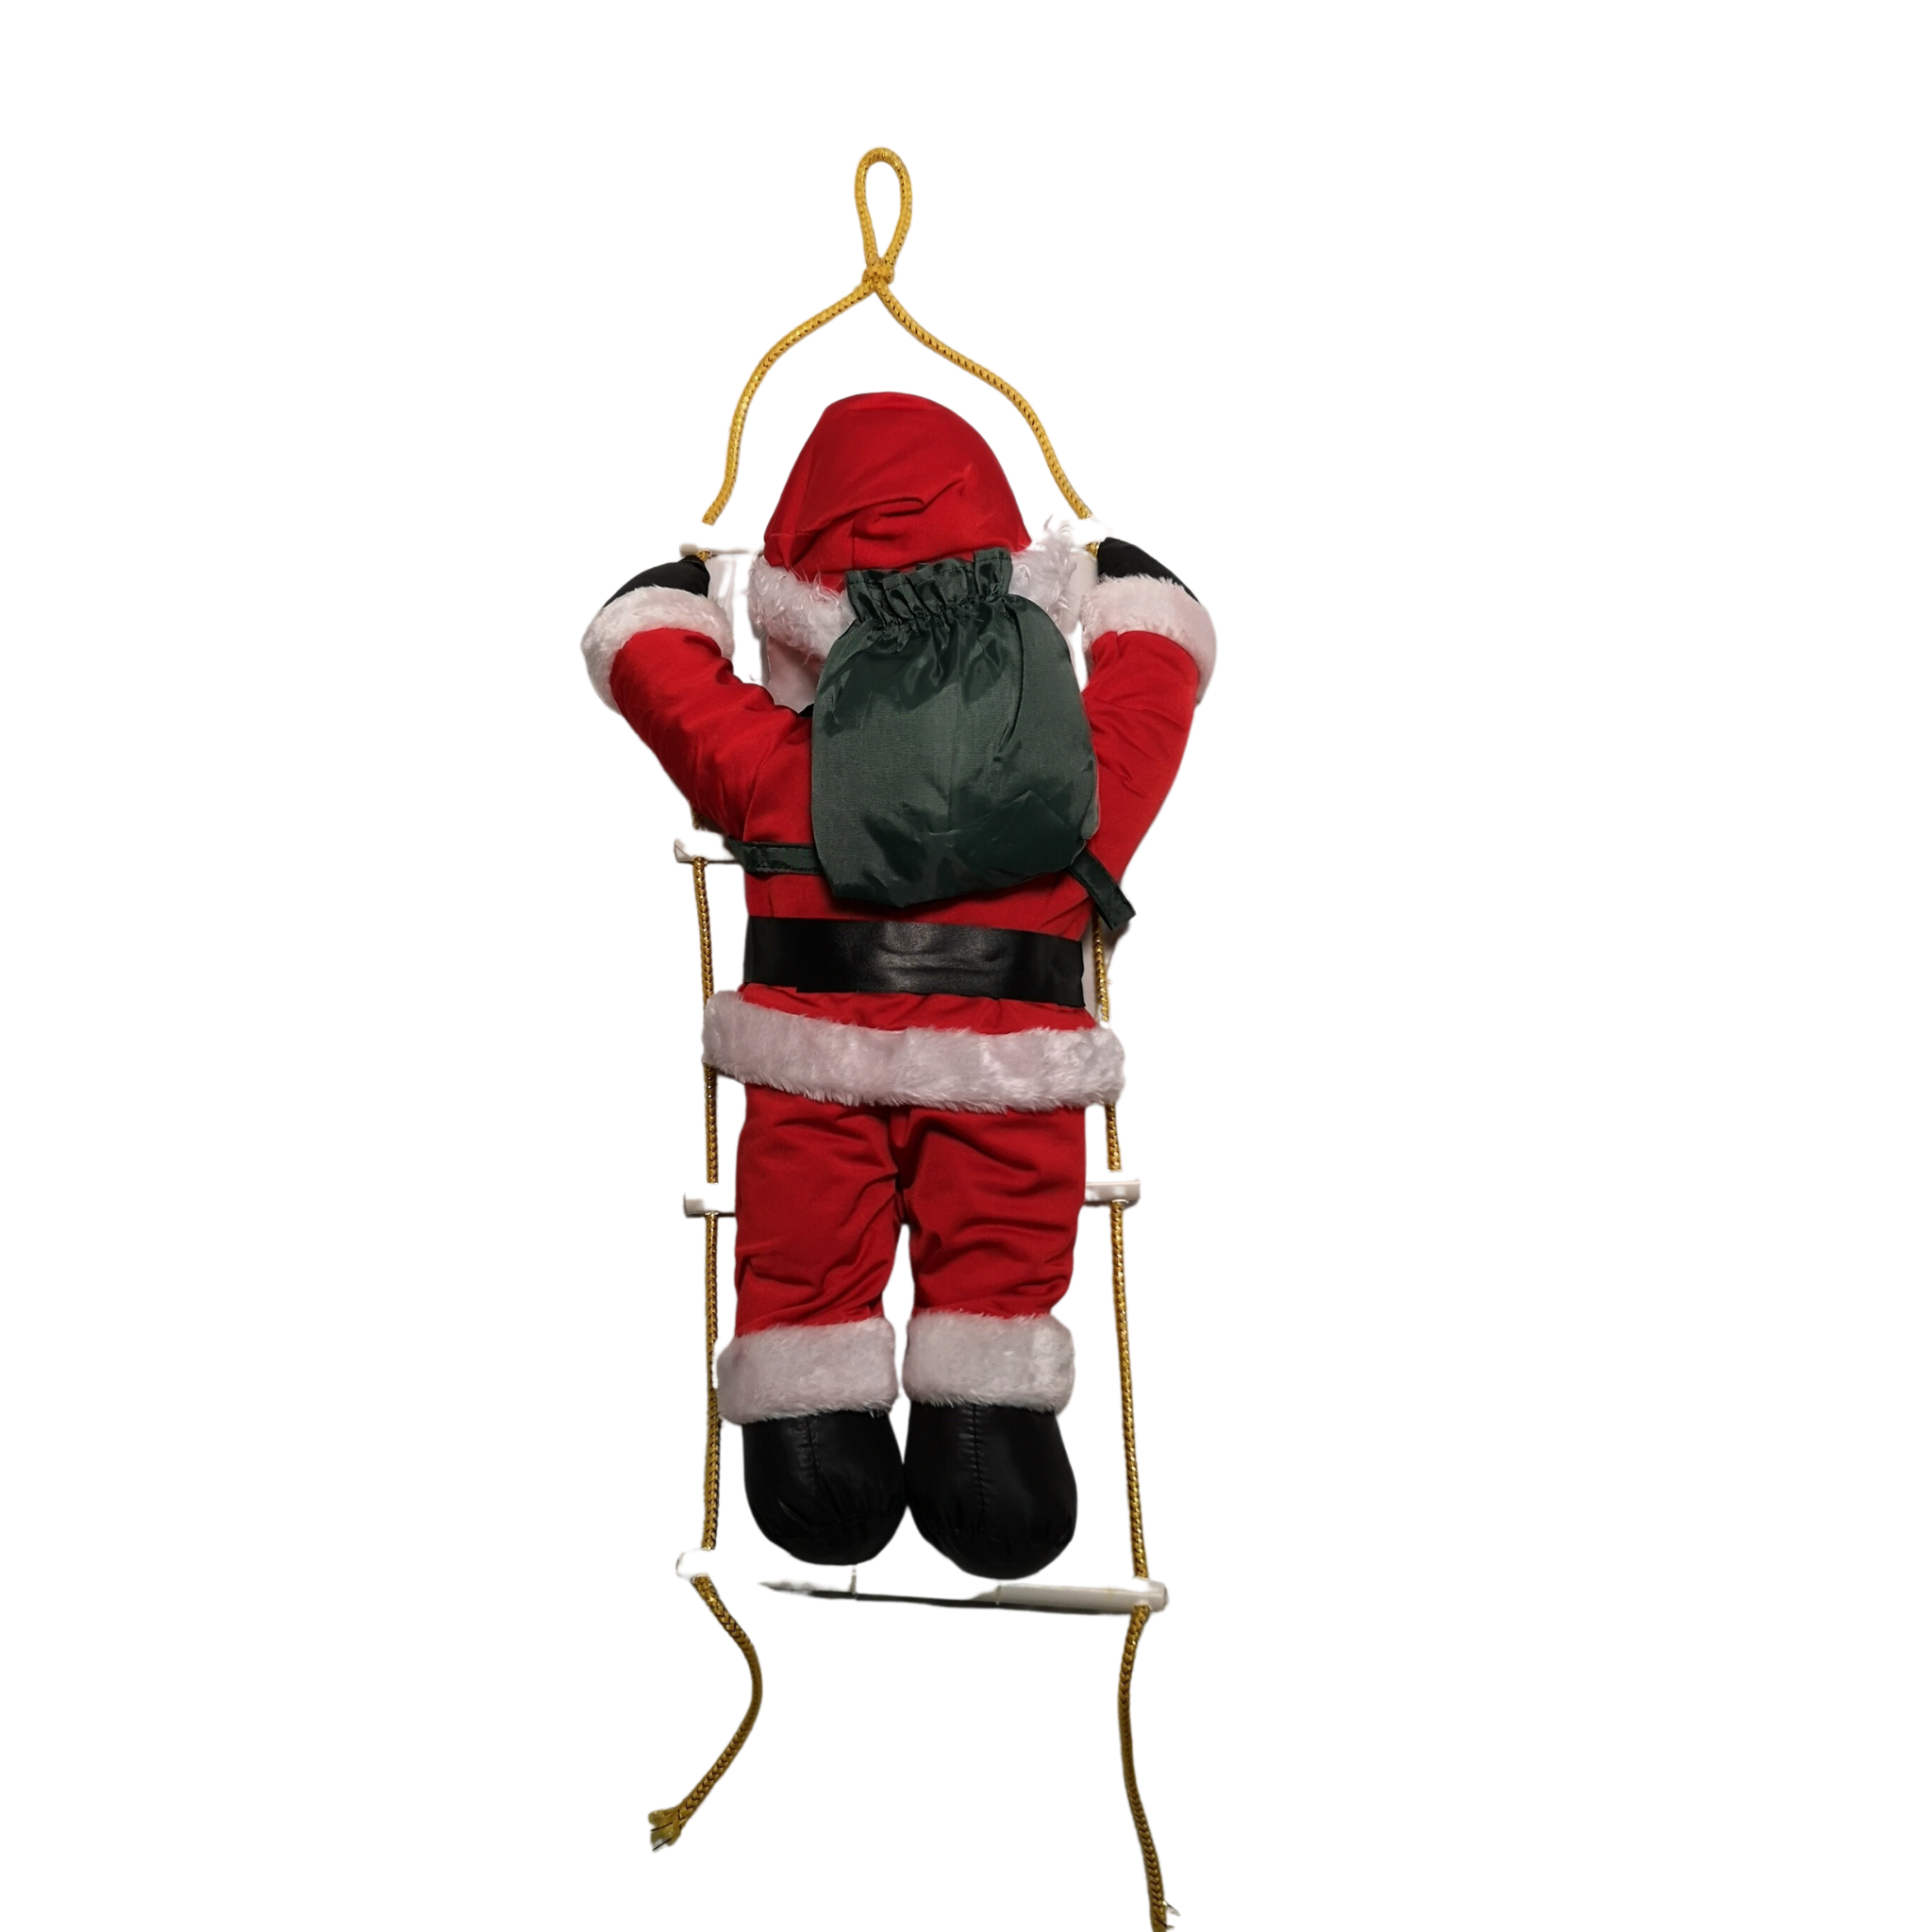 60cm Hanging Santa with Backpack Climbing Ladder Christmas Decoration